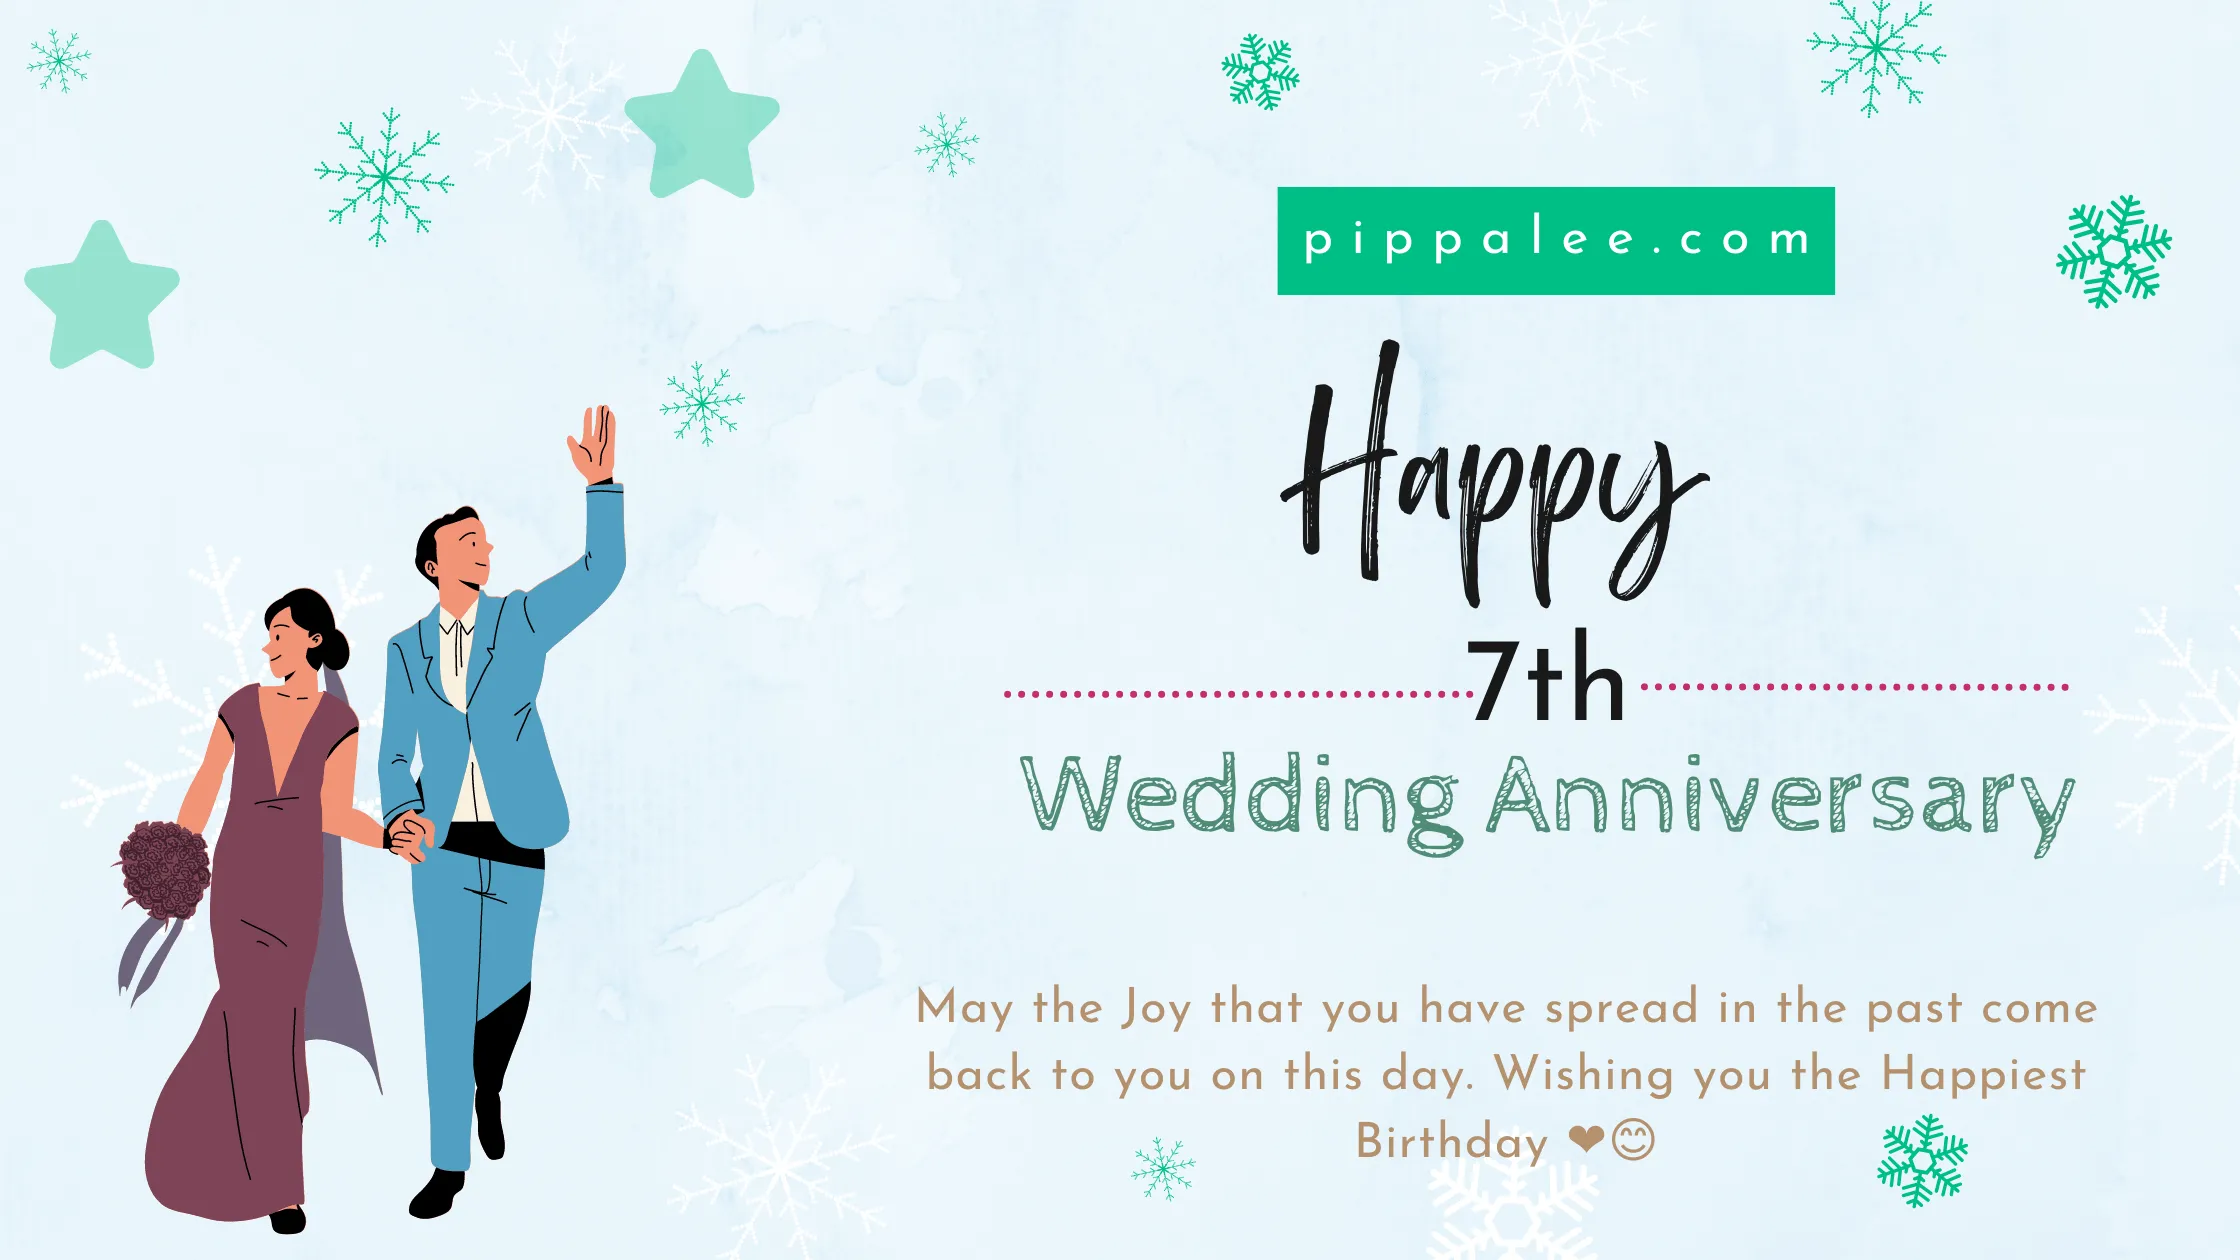 7th Wedding Anniversary - Wishes & Messages